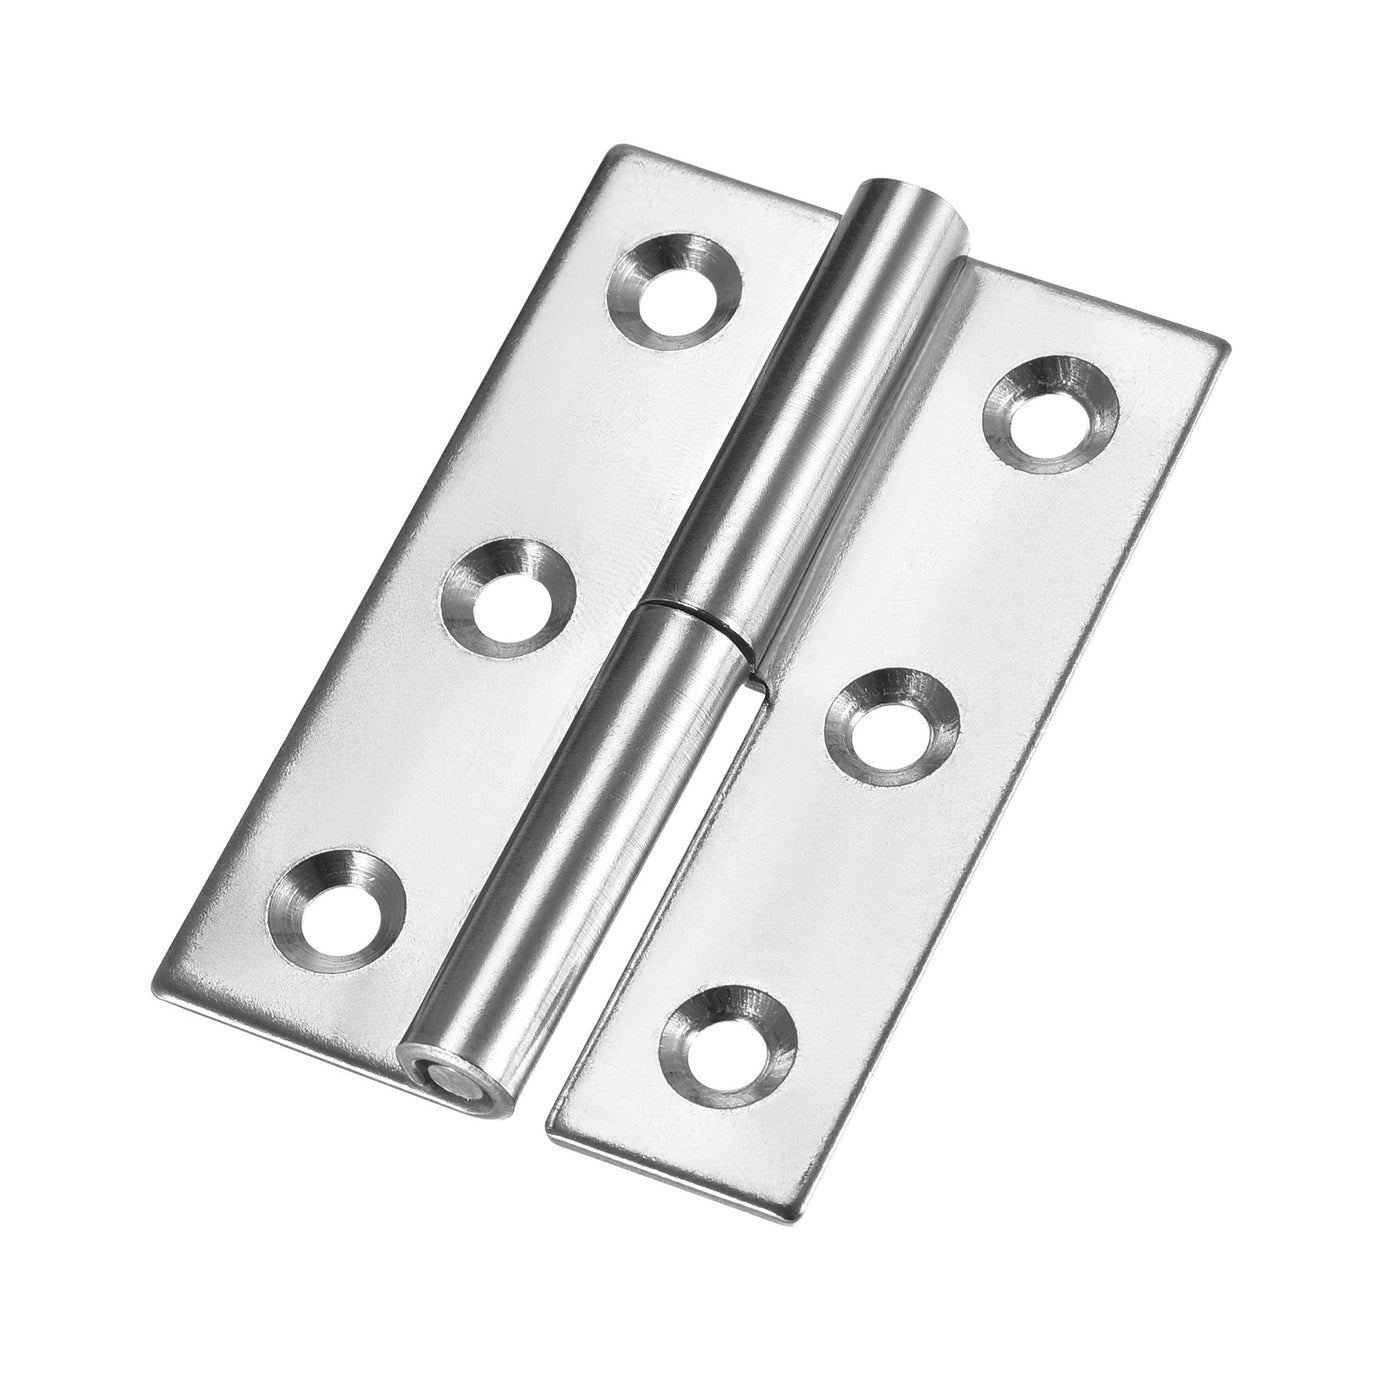 uxcell Uxcell Lift Off Hinge , Mini Stainless Steel Hinge Detachable Slip Joint Small Flag Hinges 75mm Long 50mm Open Width